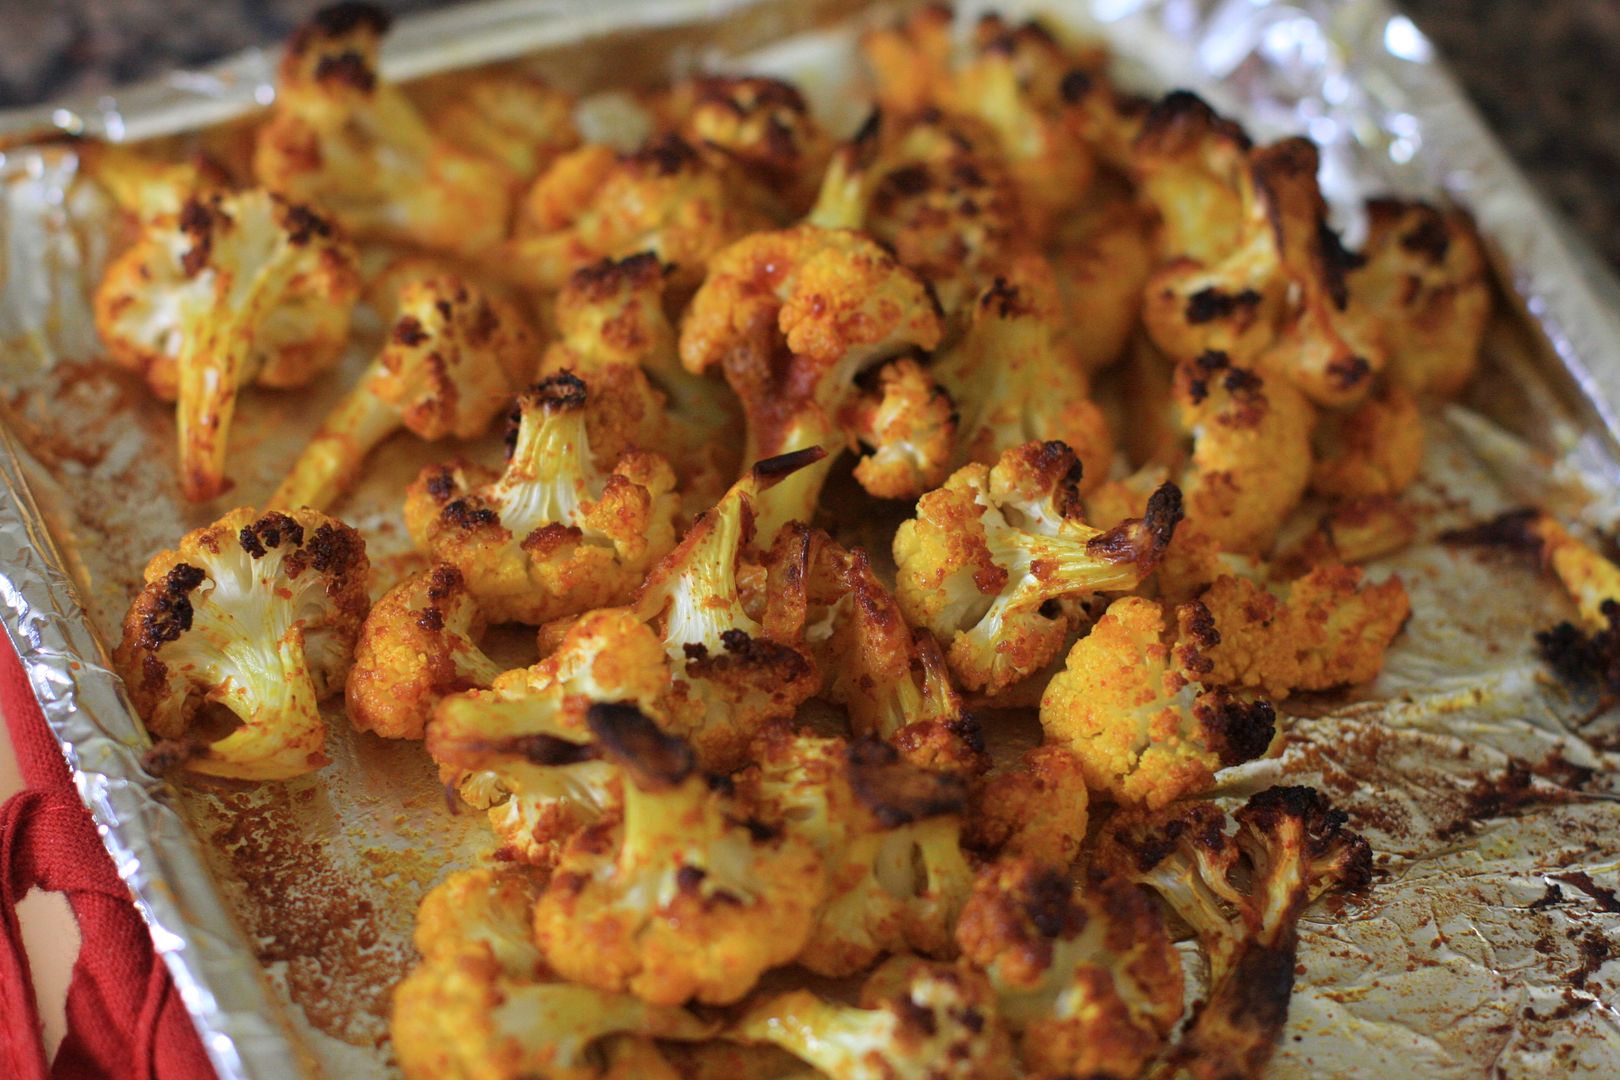 Quick Roasted Cauliflower - In the toaster oven | Daily Musings